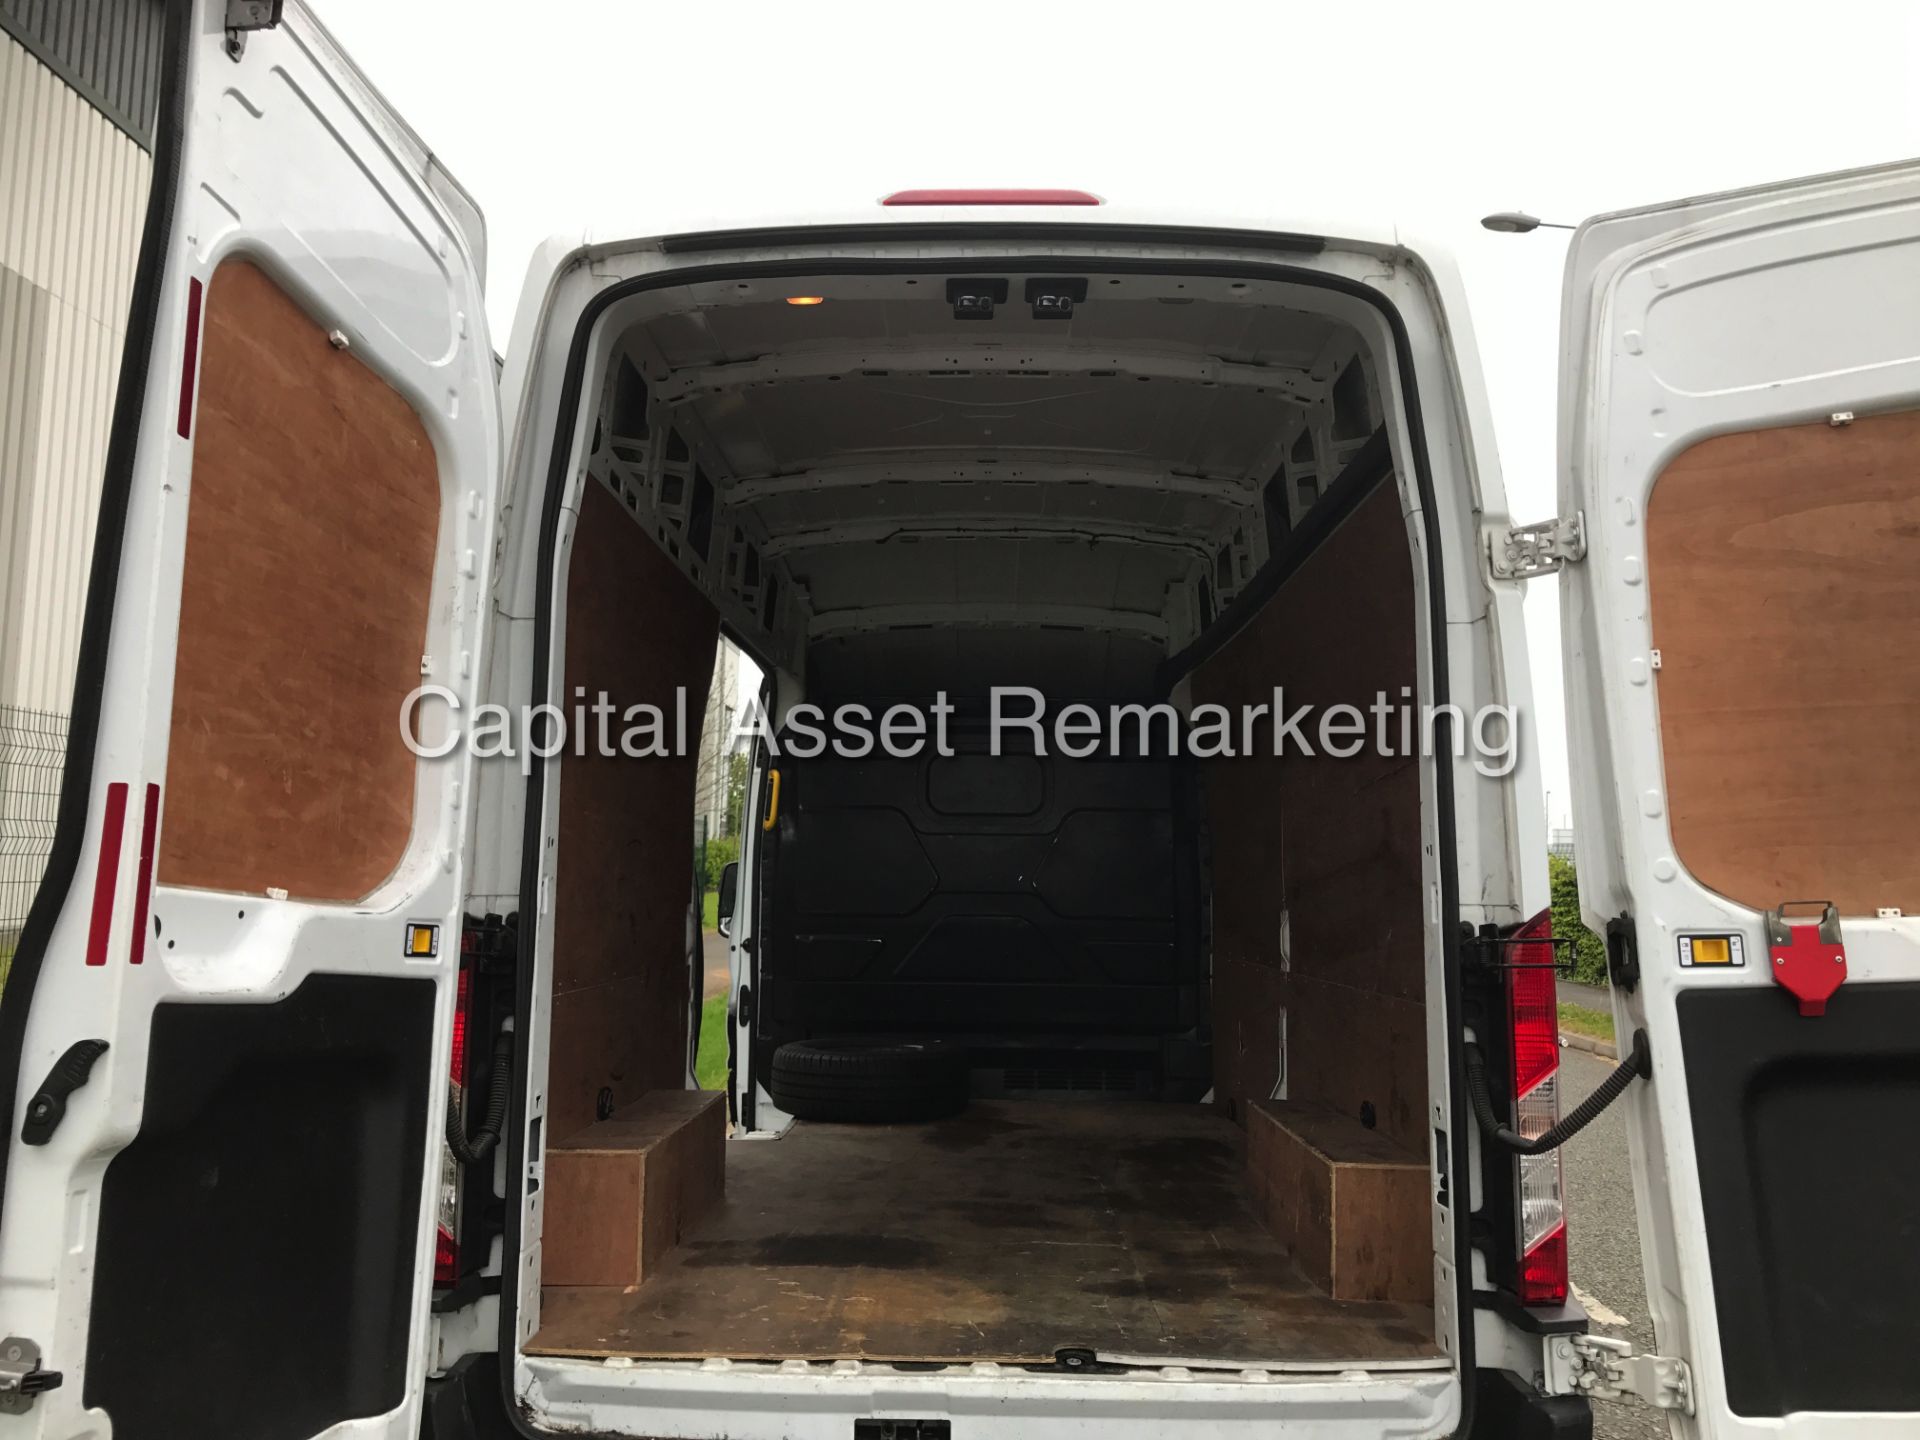 (ON SALE) FORD TRANSIT 2.2TDCI "125BHP - 6 SPEED" 350 LONG WHEEL BASE/ HIGH ROOF "NEW SHAPE" - Image 3 of 10